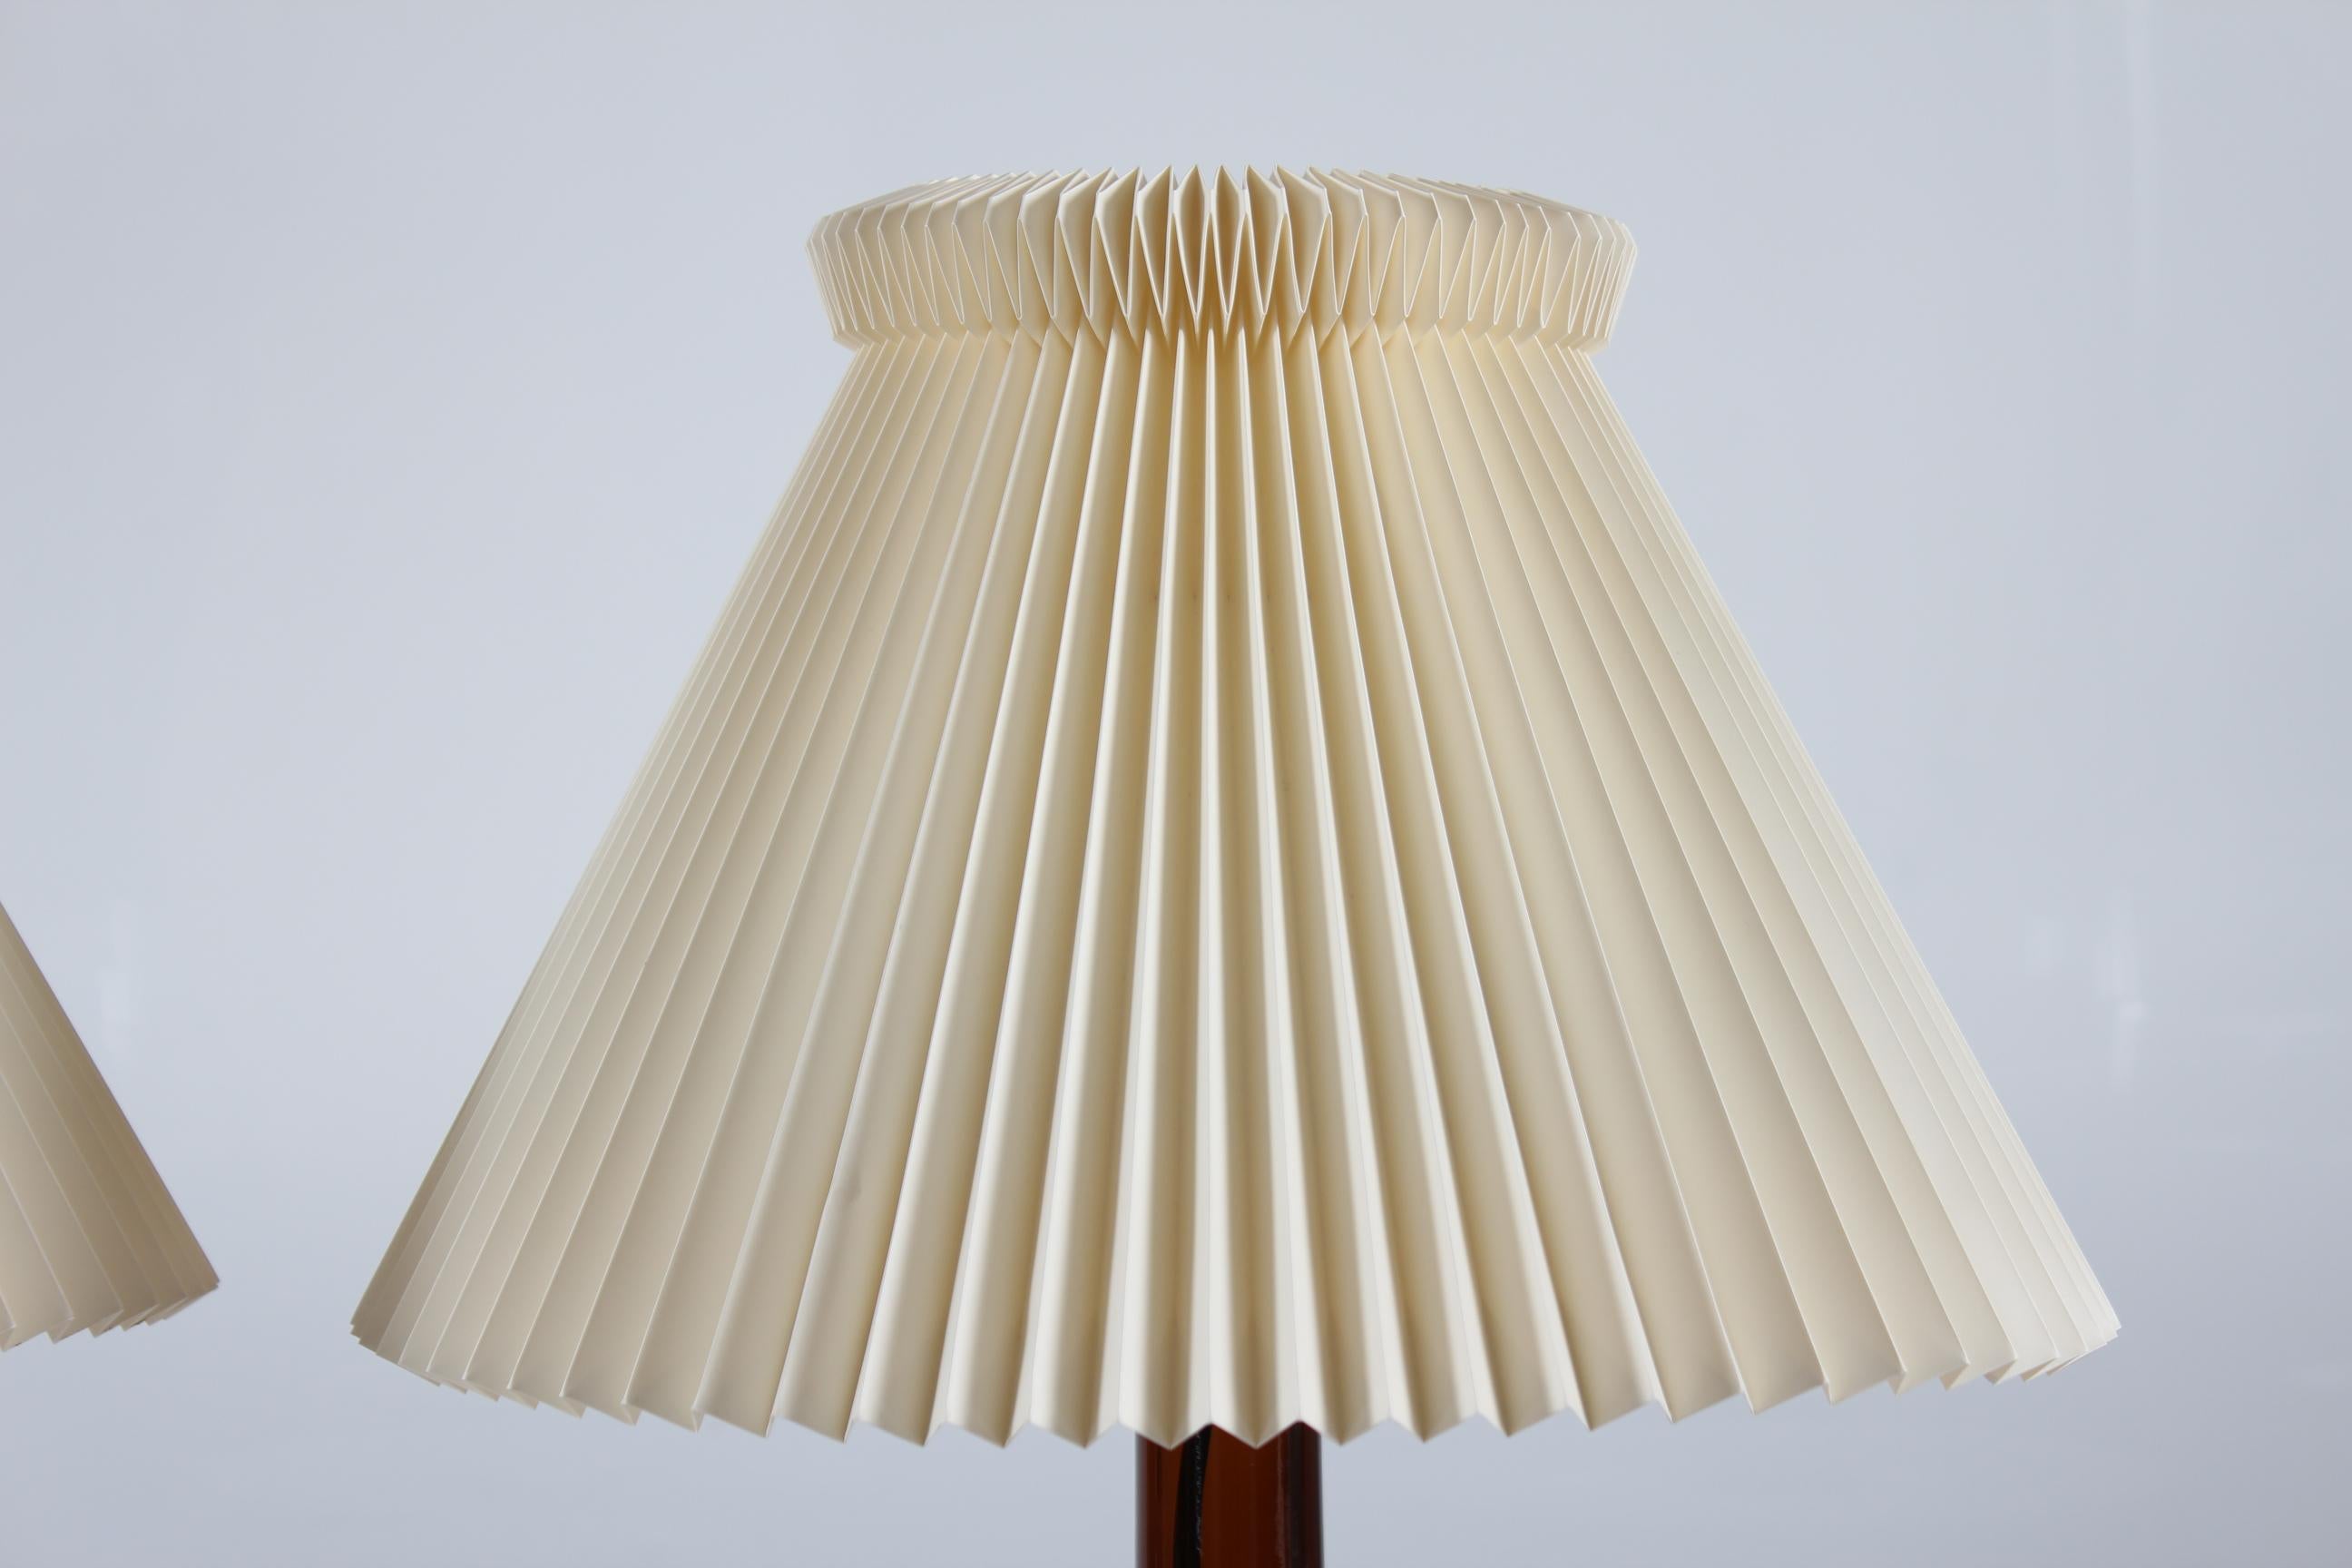 A pair of Danish table lamp model 343 by designer by Biilmann-Petersen 
The lamp foots are made of mouth blown translucent dark amber or brown colored glass from Holmegaard glass works and comes with vintage original Le Klint lamp